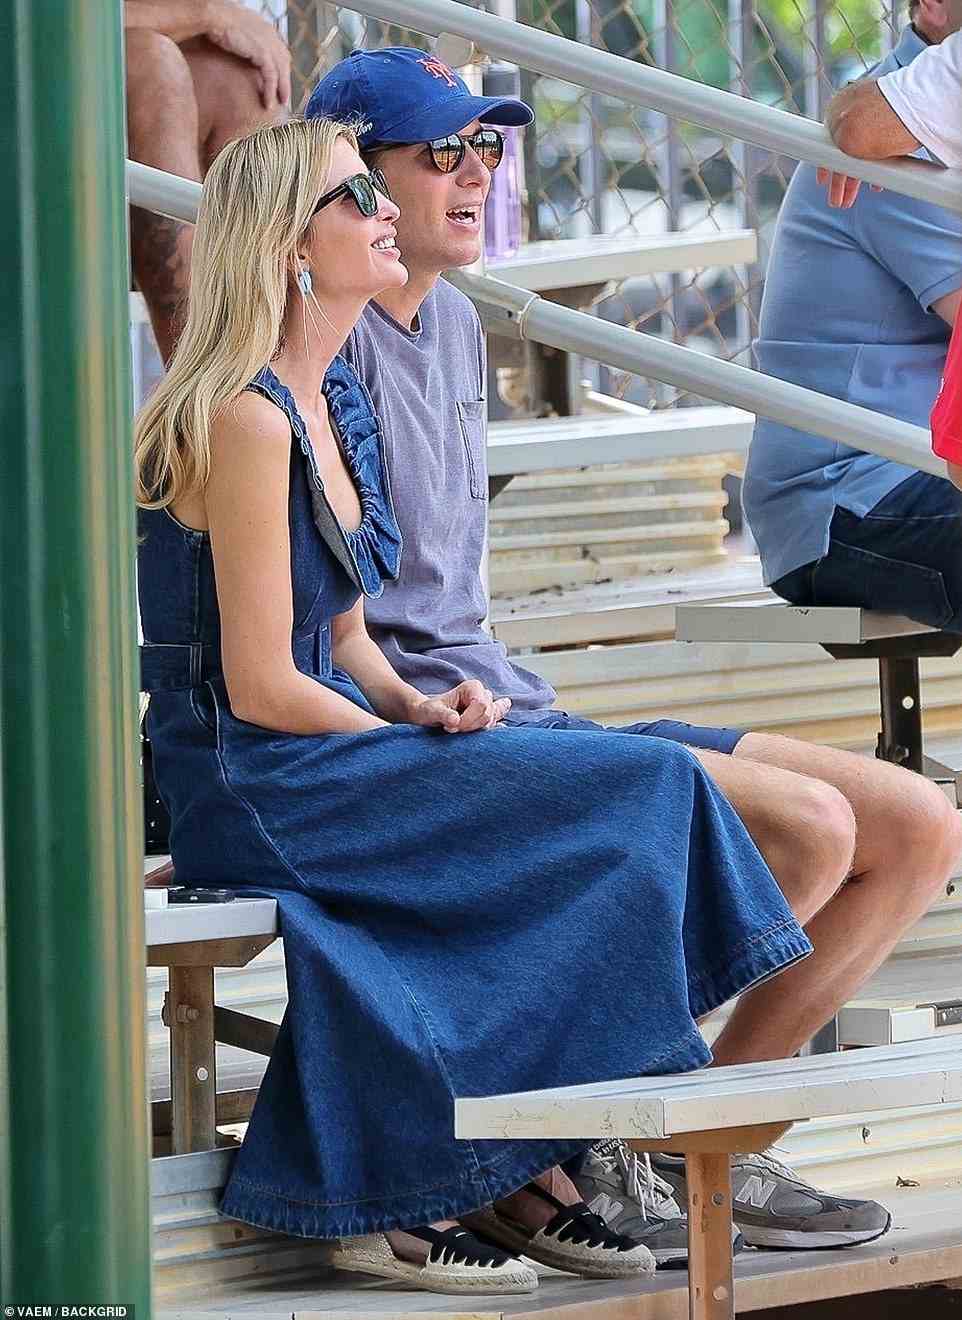 The couple had bright smiles on their faces as they sat in the stands during the game